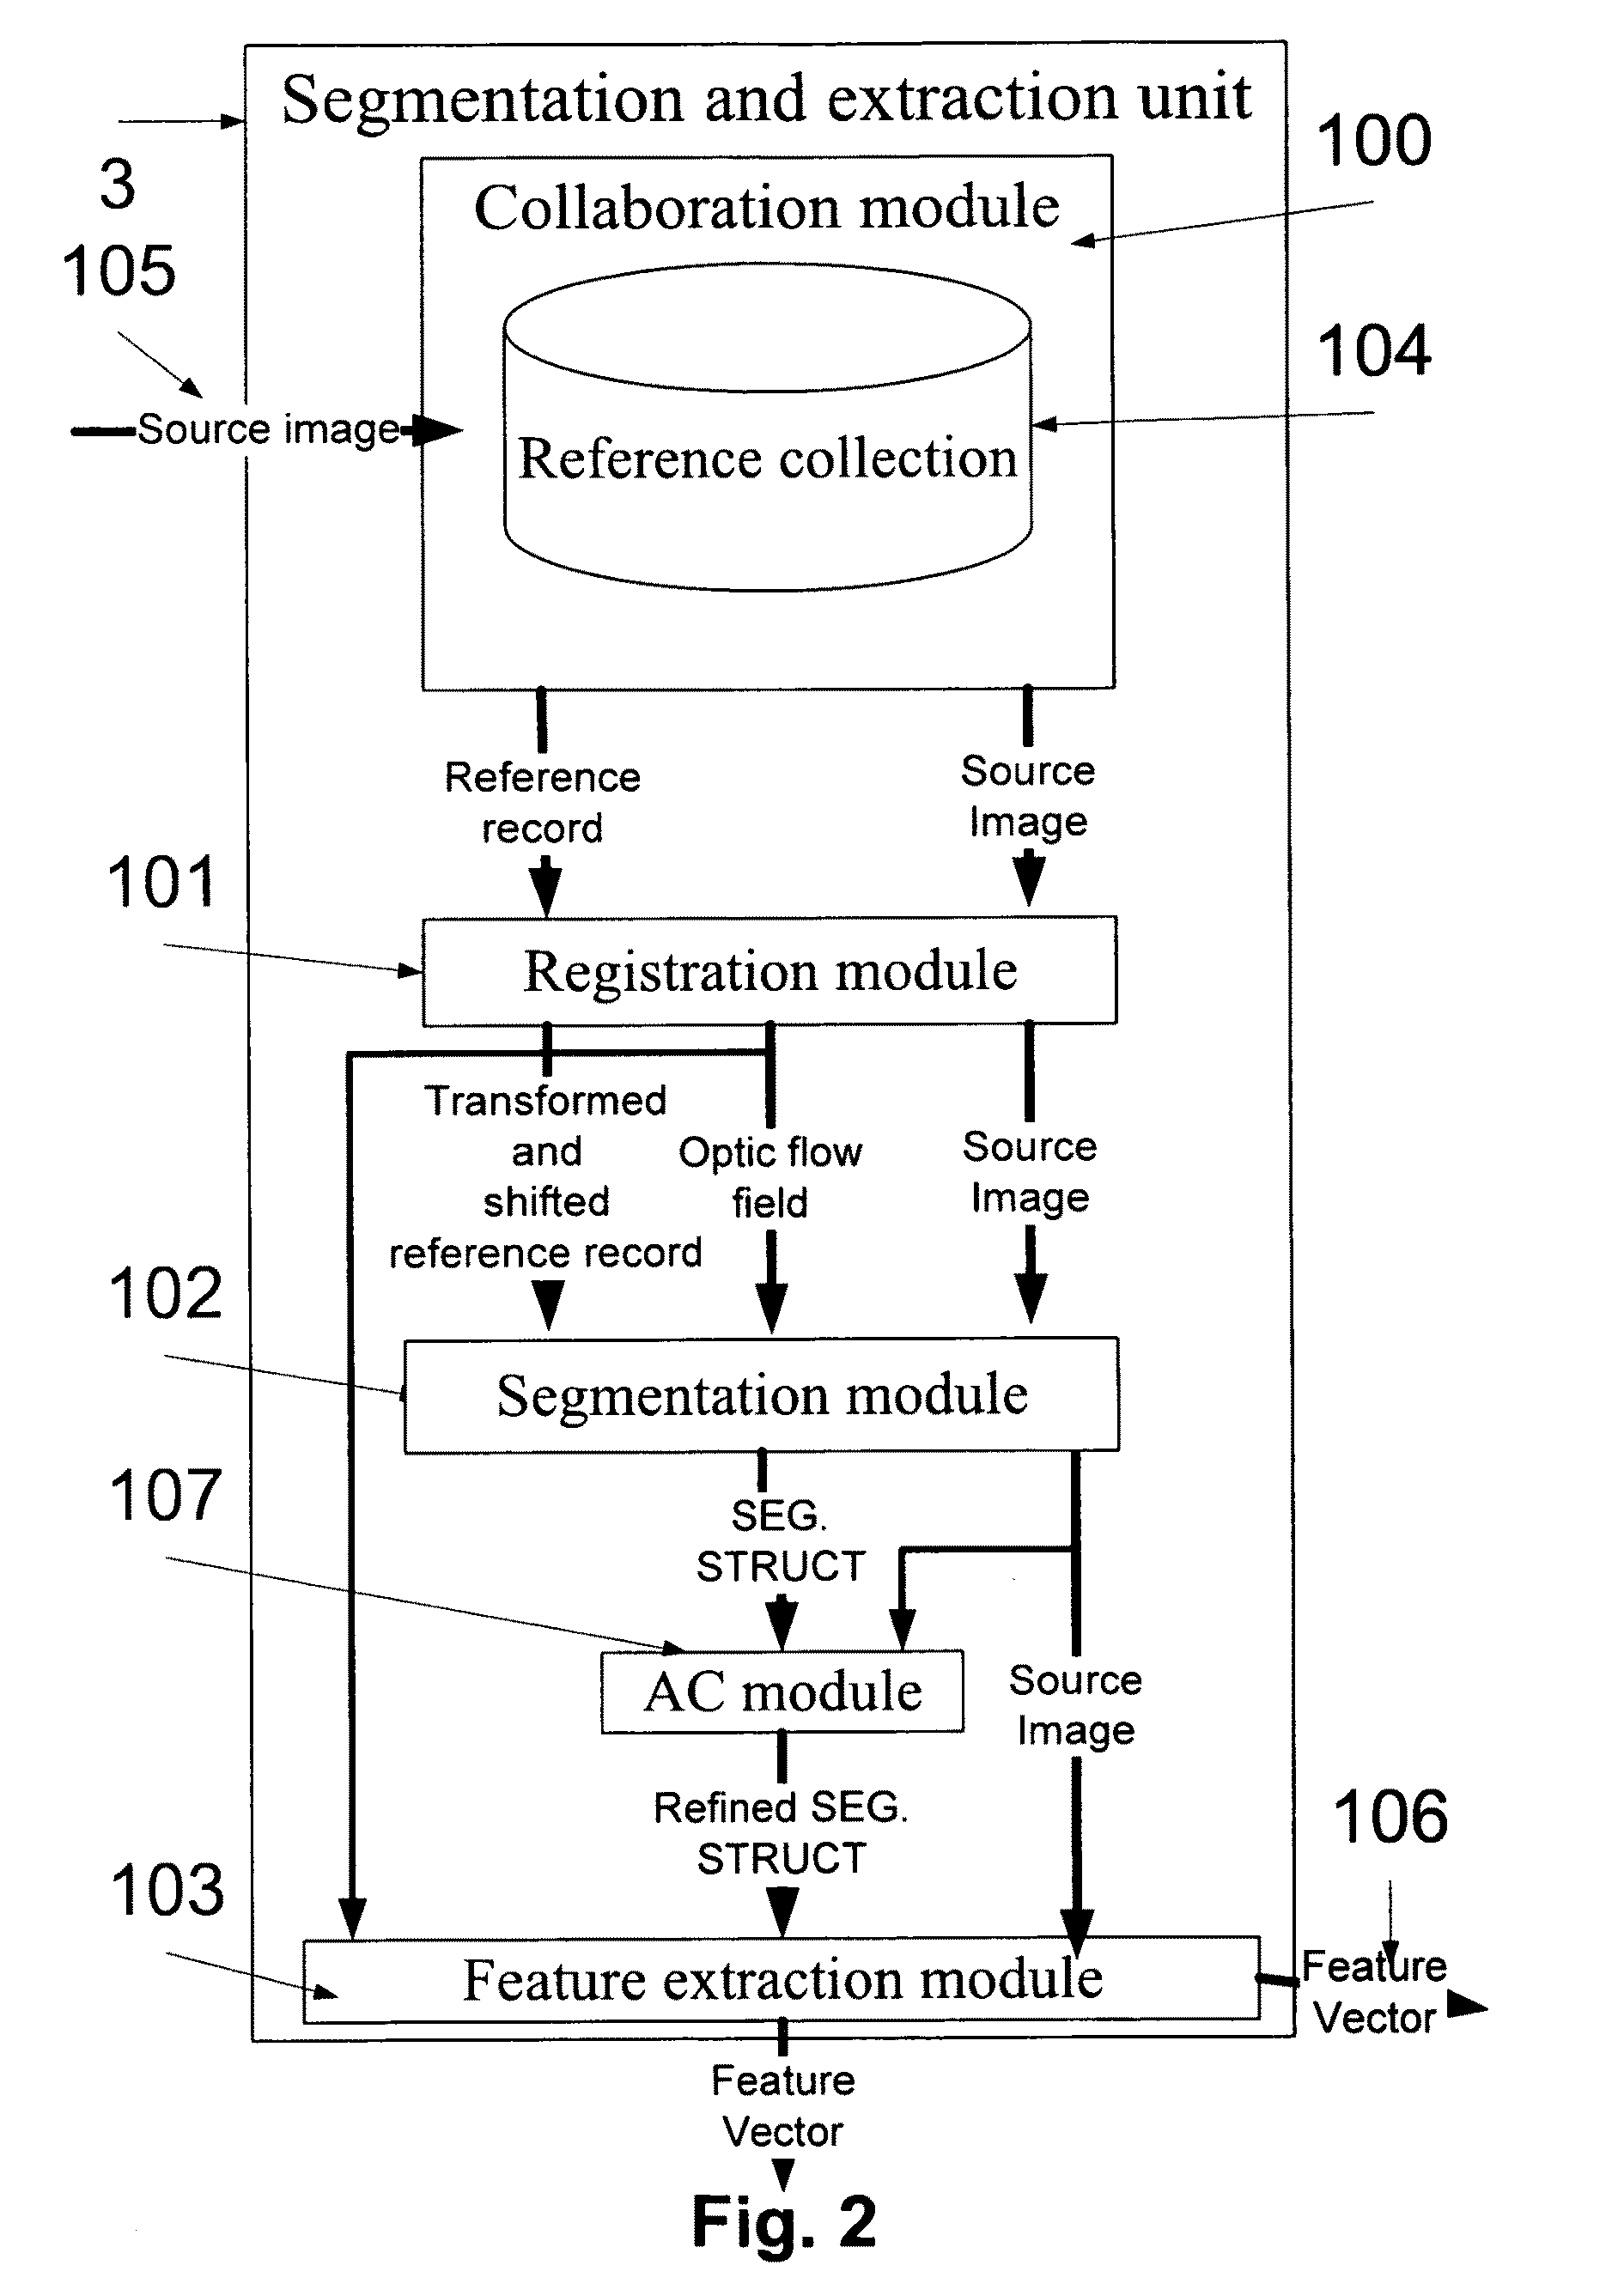 System and Method of Automatic Prioritization and Analysis of Medical Images